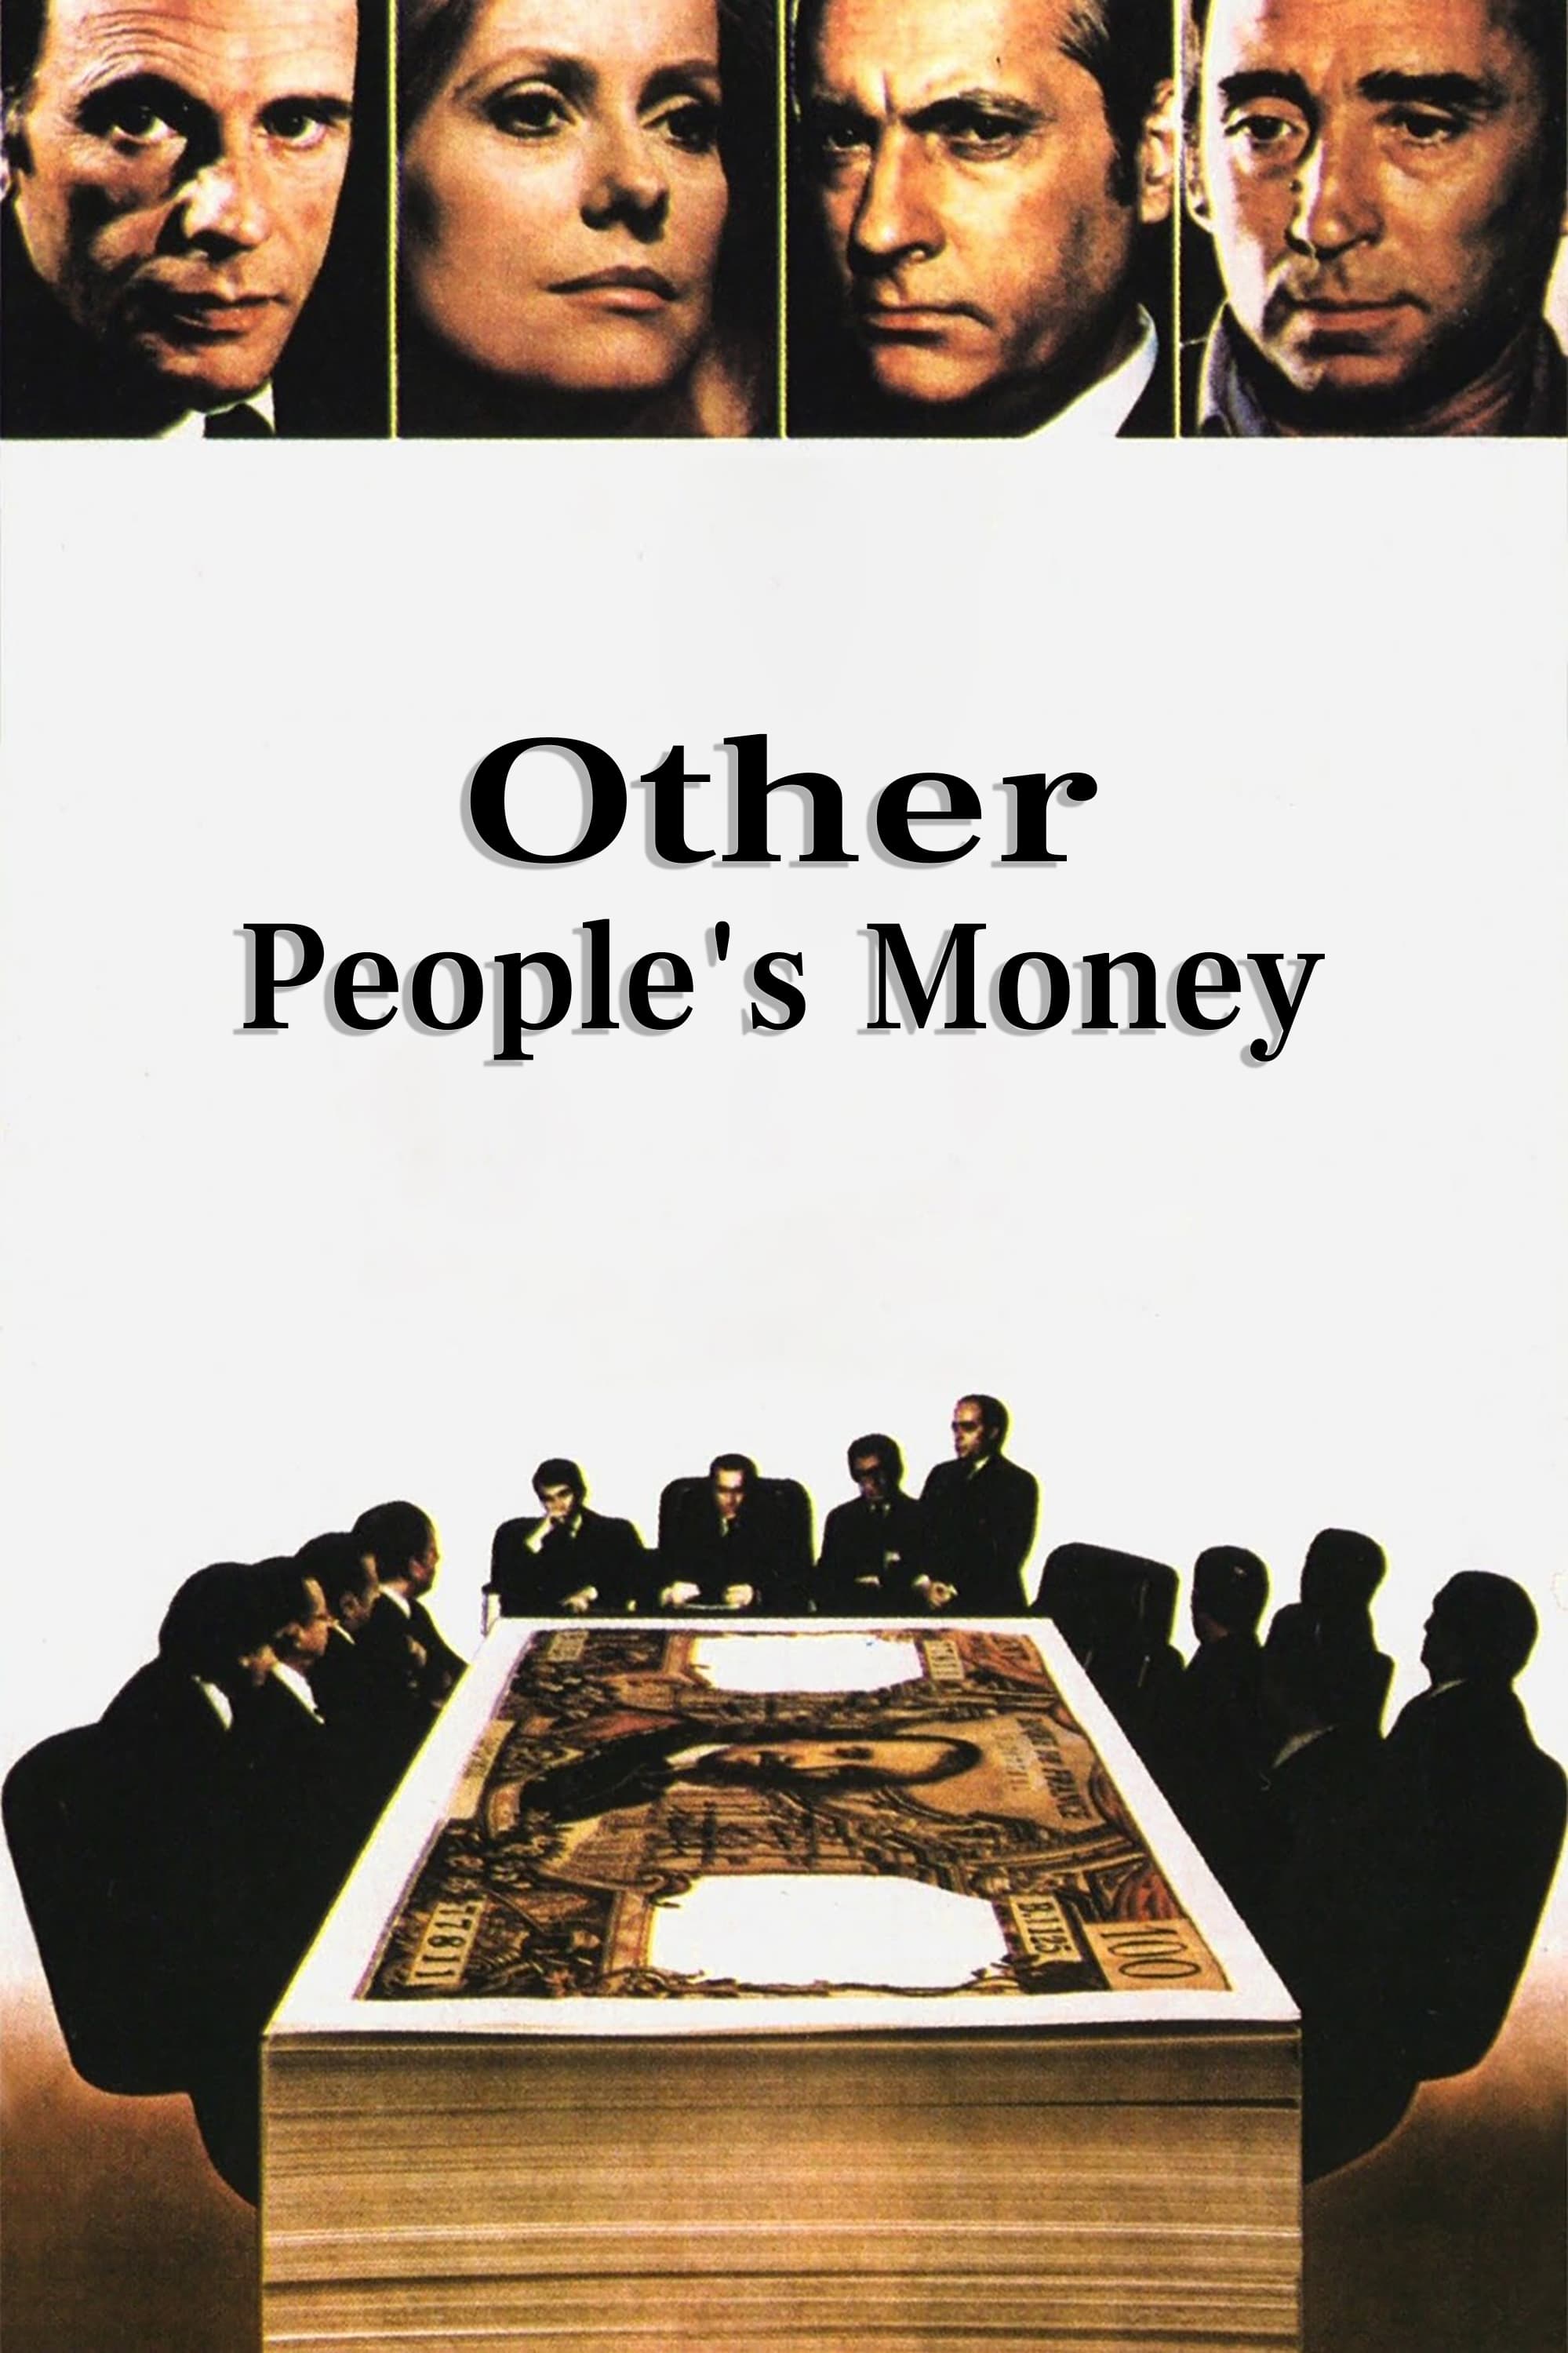 Other People's Money (1978)